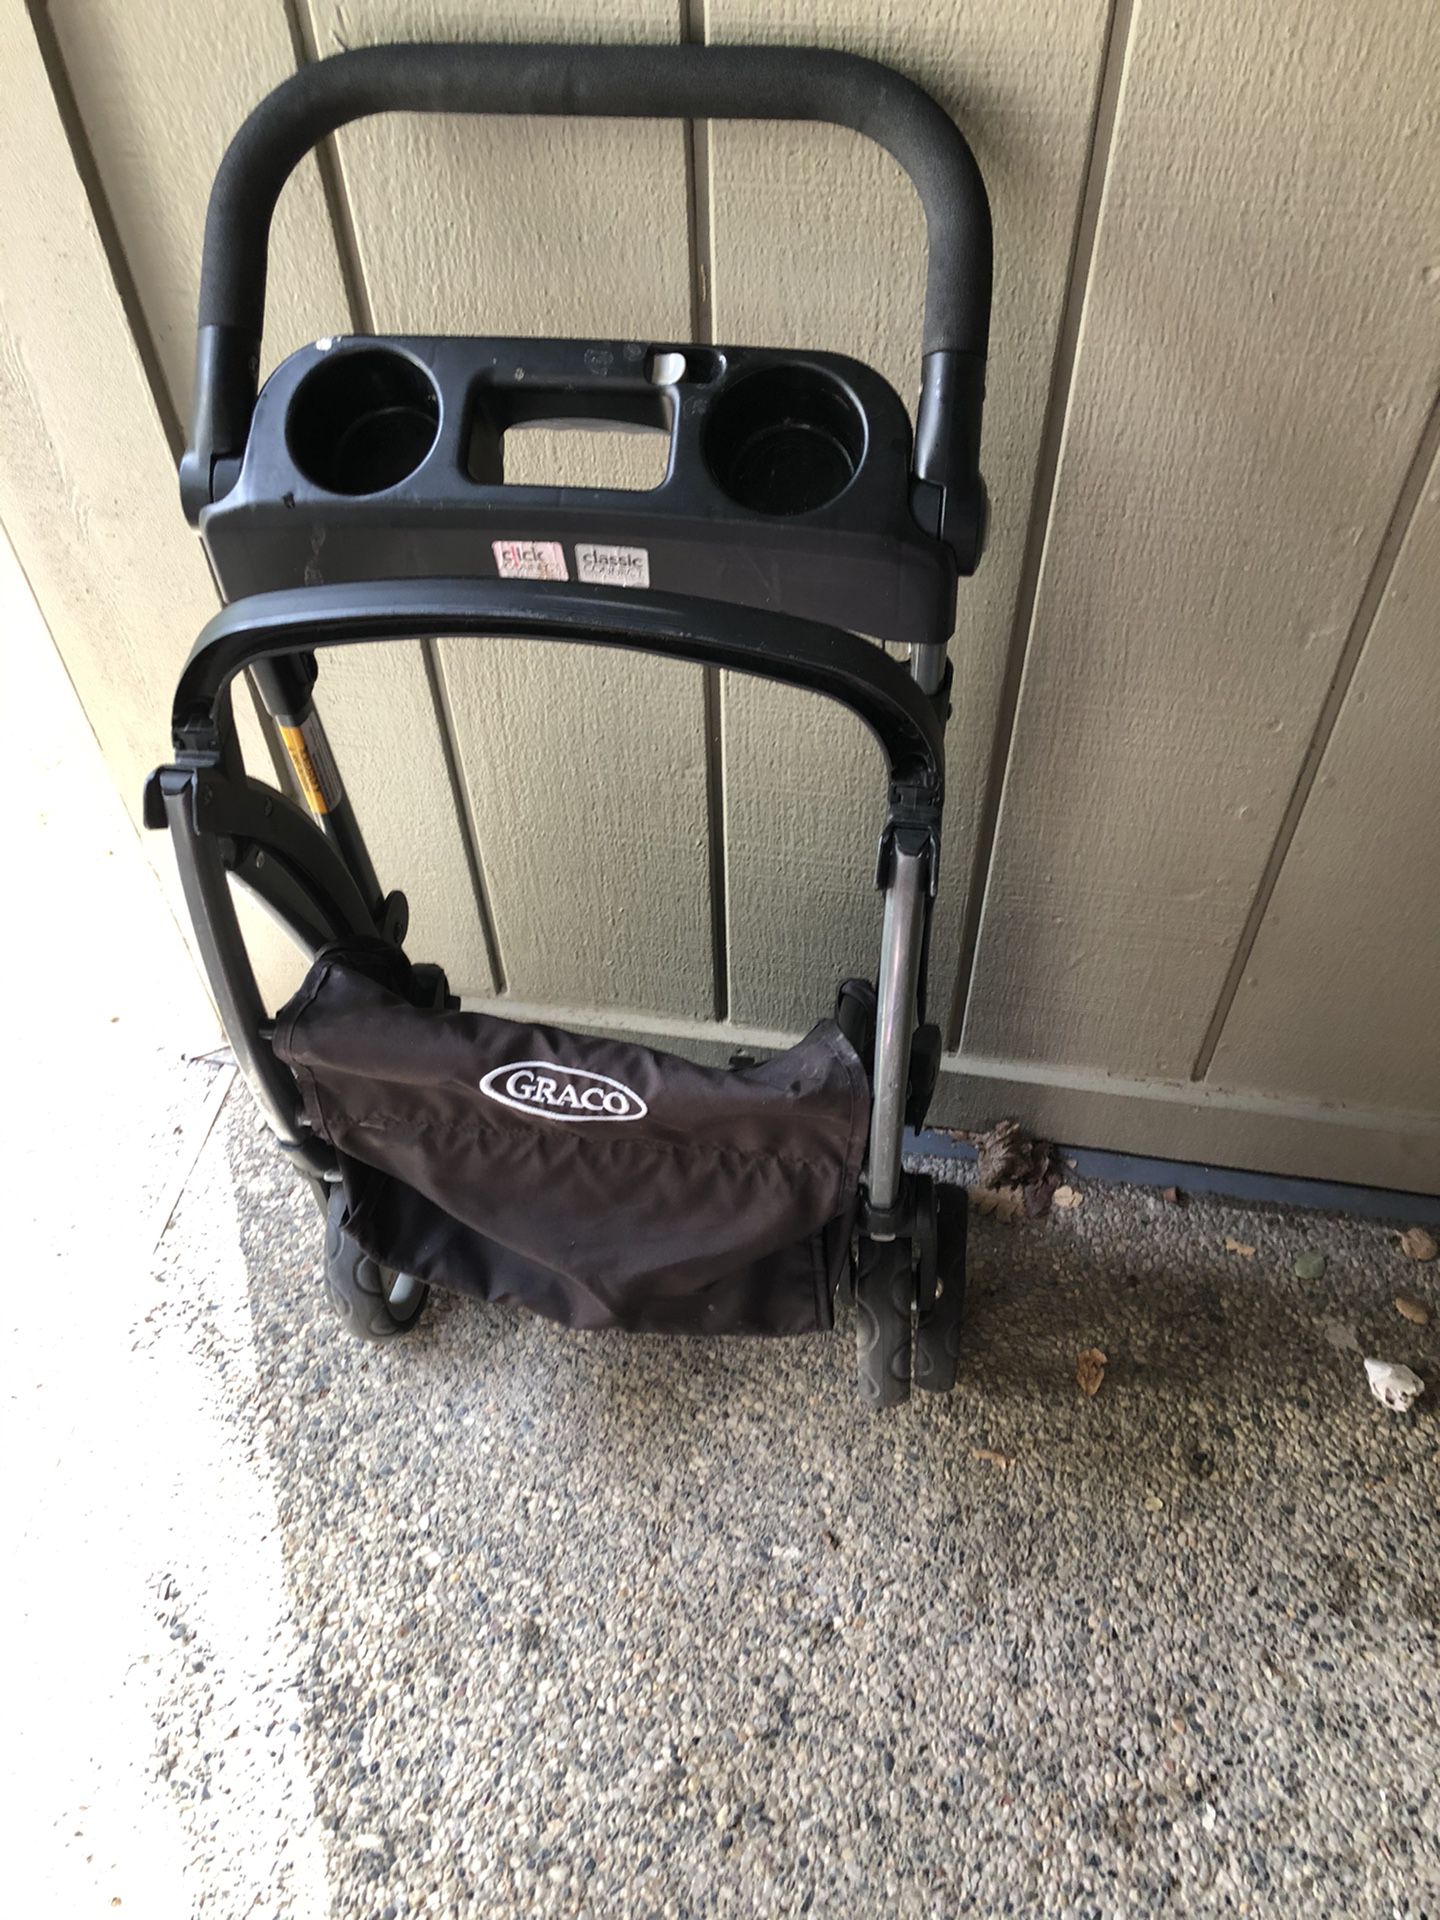 Gracco stroller caddy and extra base $15 each or $25 for both obo